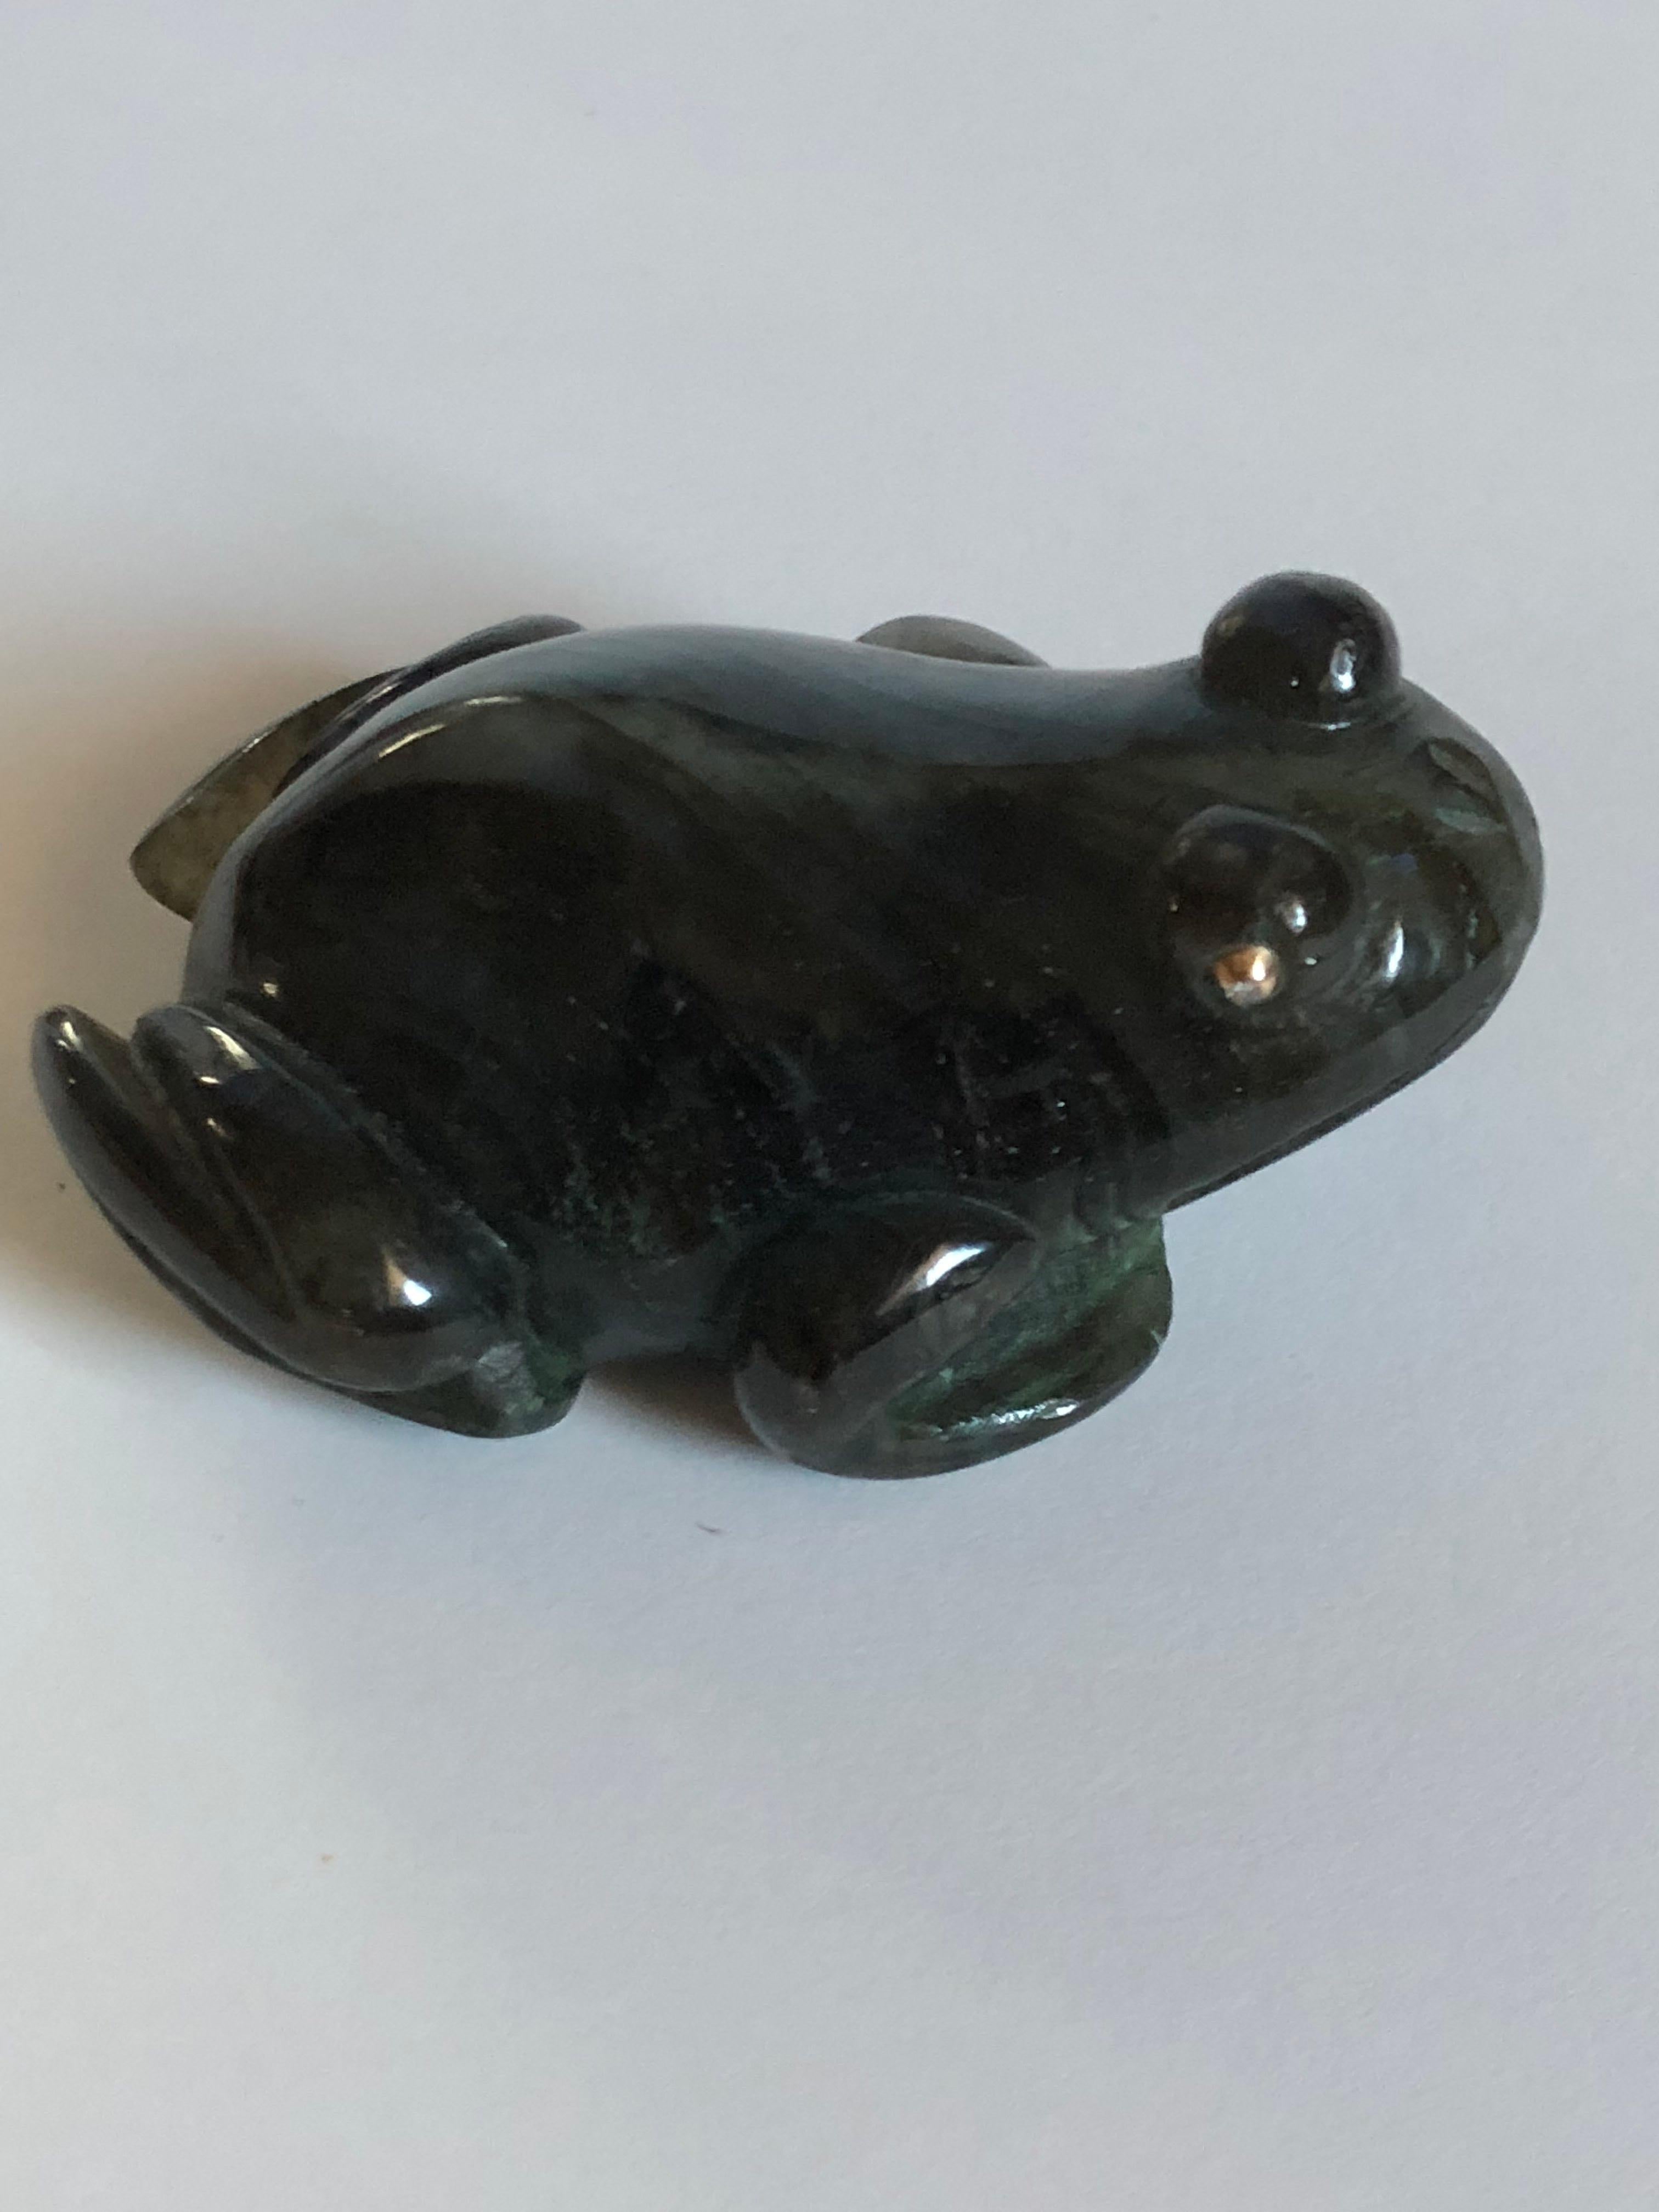 Faberge Antique Imperial Russian Miniature Frog Sculpture with Diamond Eyes In Good Condition For Sale In Houston, TX